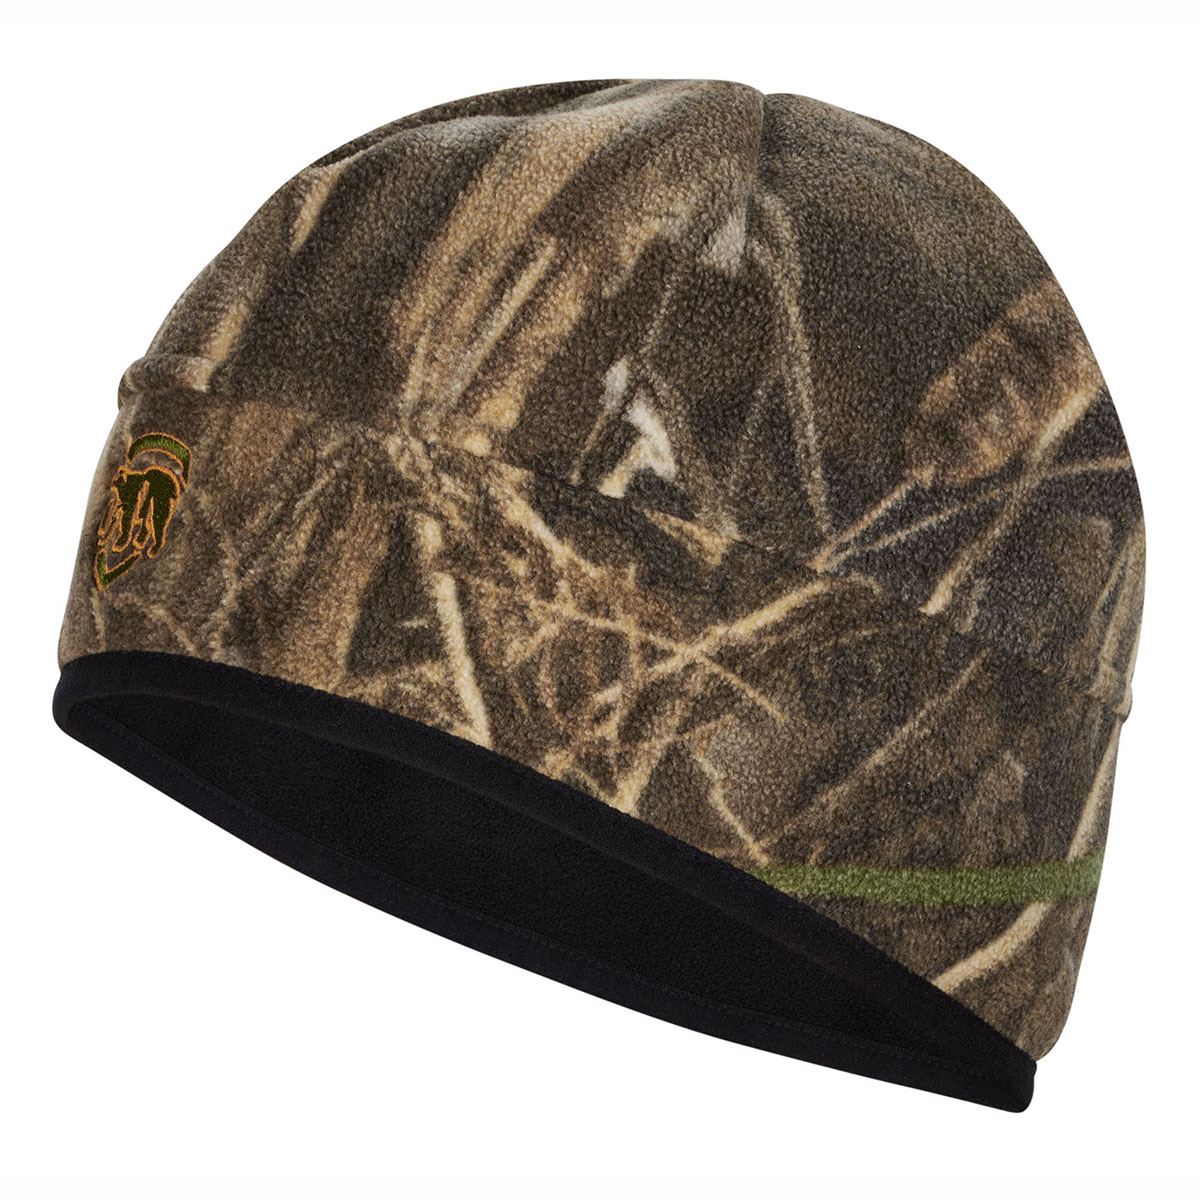 and - Outerwear Systems | REALTREE BEANIE Hunting MAX-7® ArcticShield Collections SHERPA FLEECE